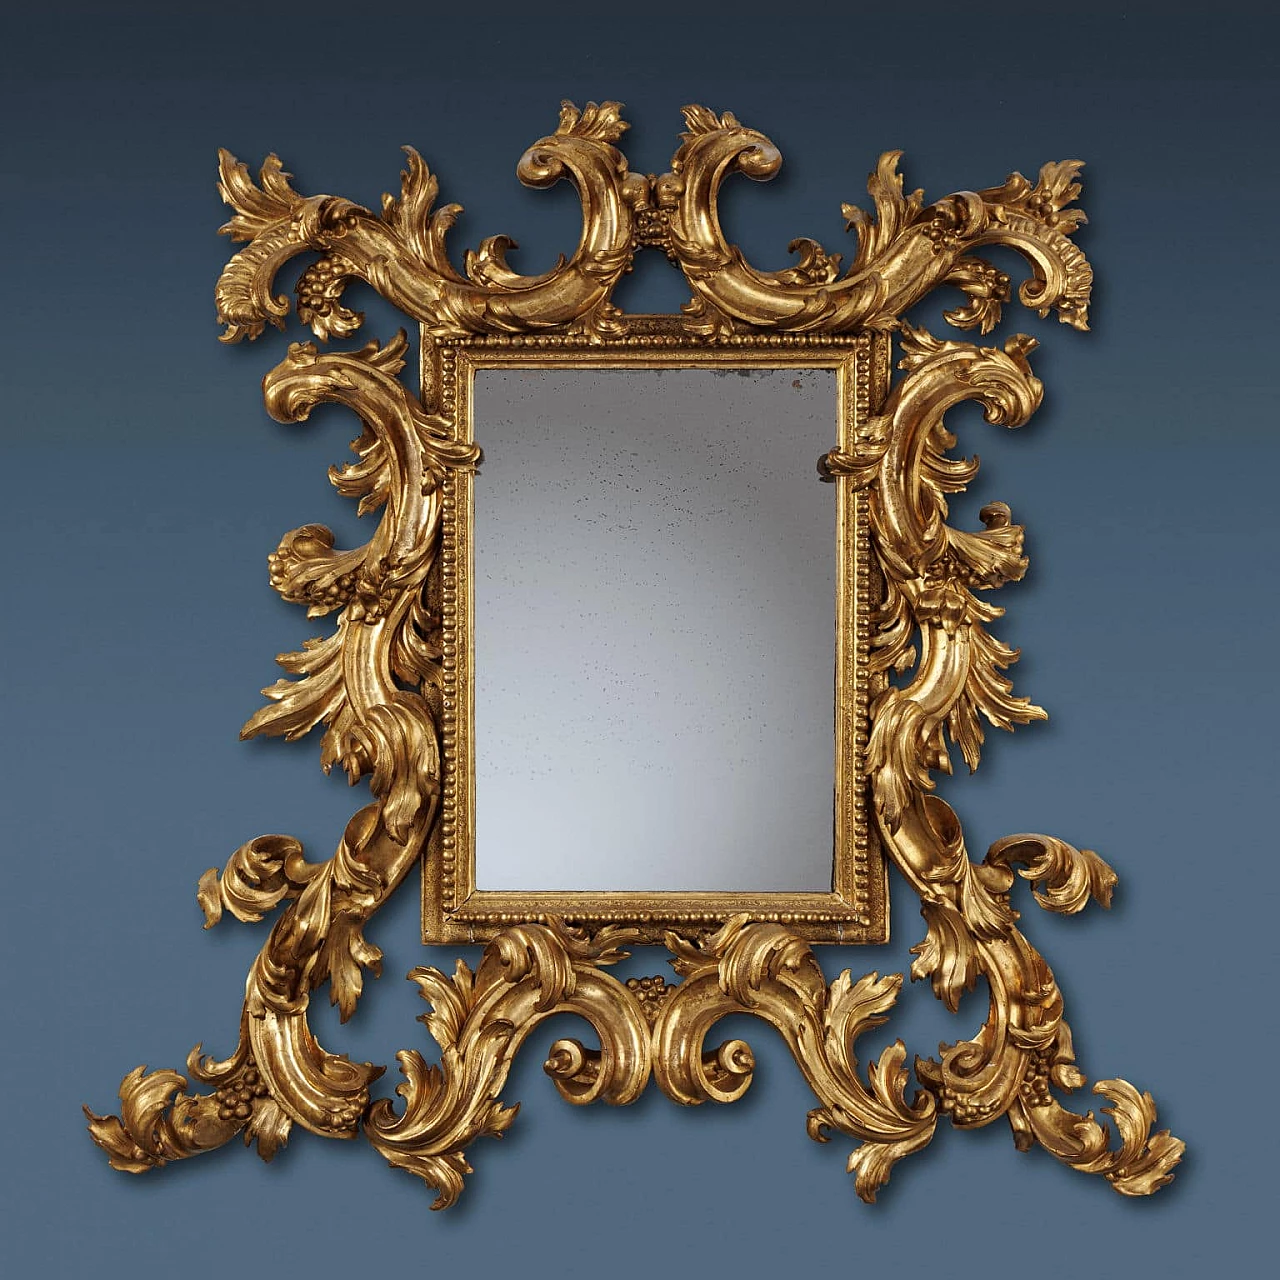 Carved and gilded mirrorboard, early 18th century 7